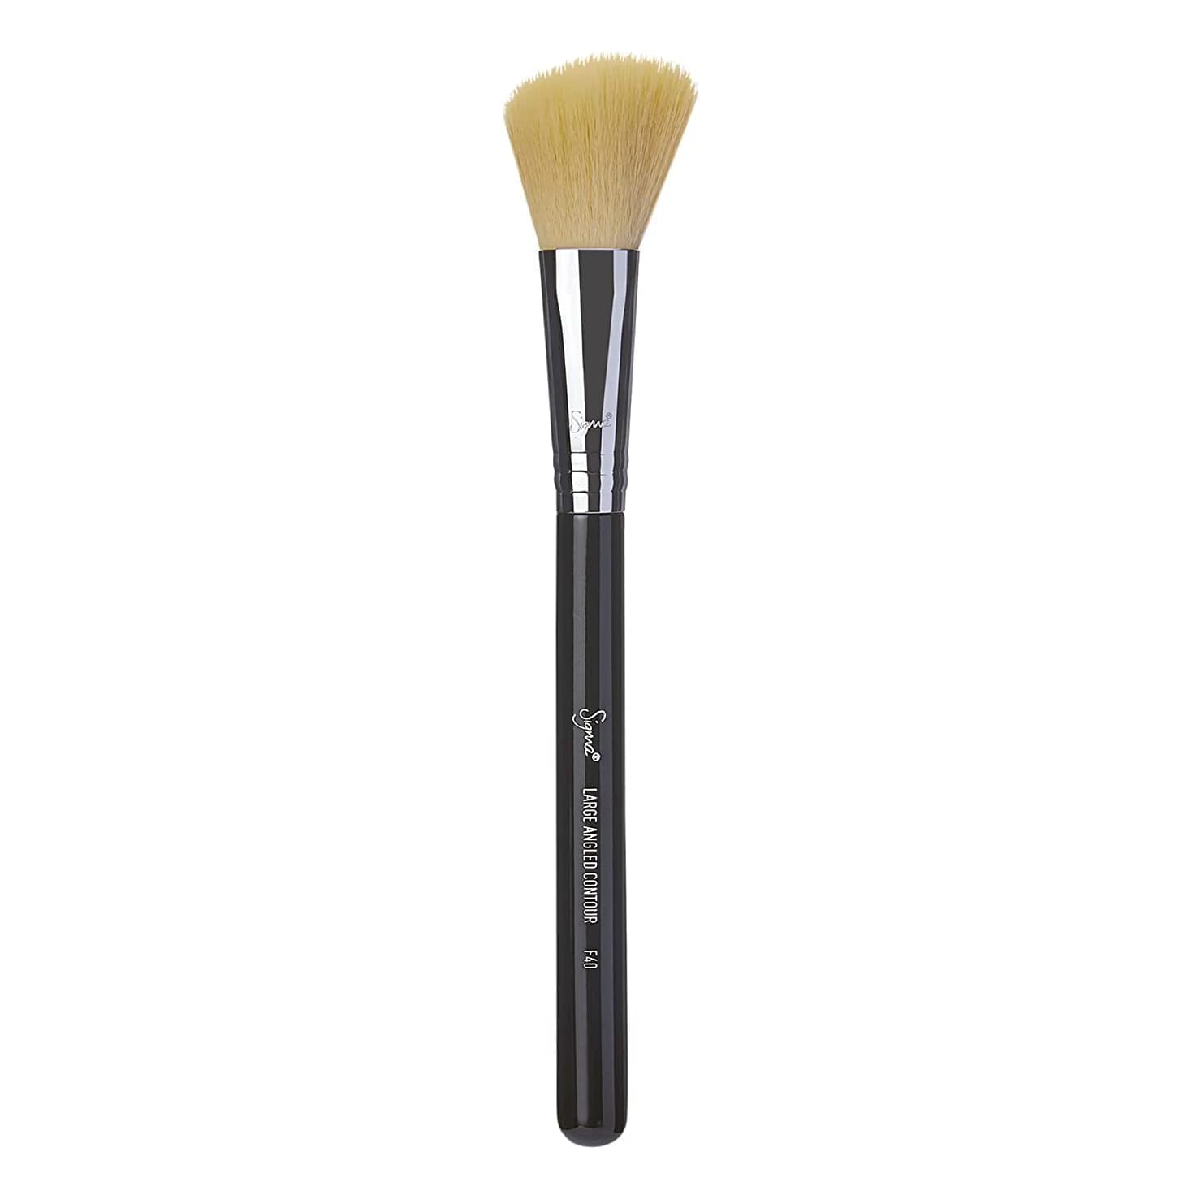 Sigma Beauty F40 Large Angled Contour Brush - a makeup brush designed for contouring on a white background